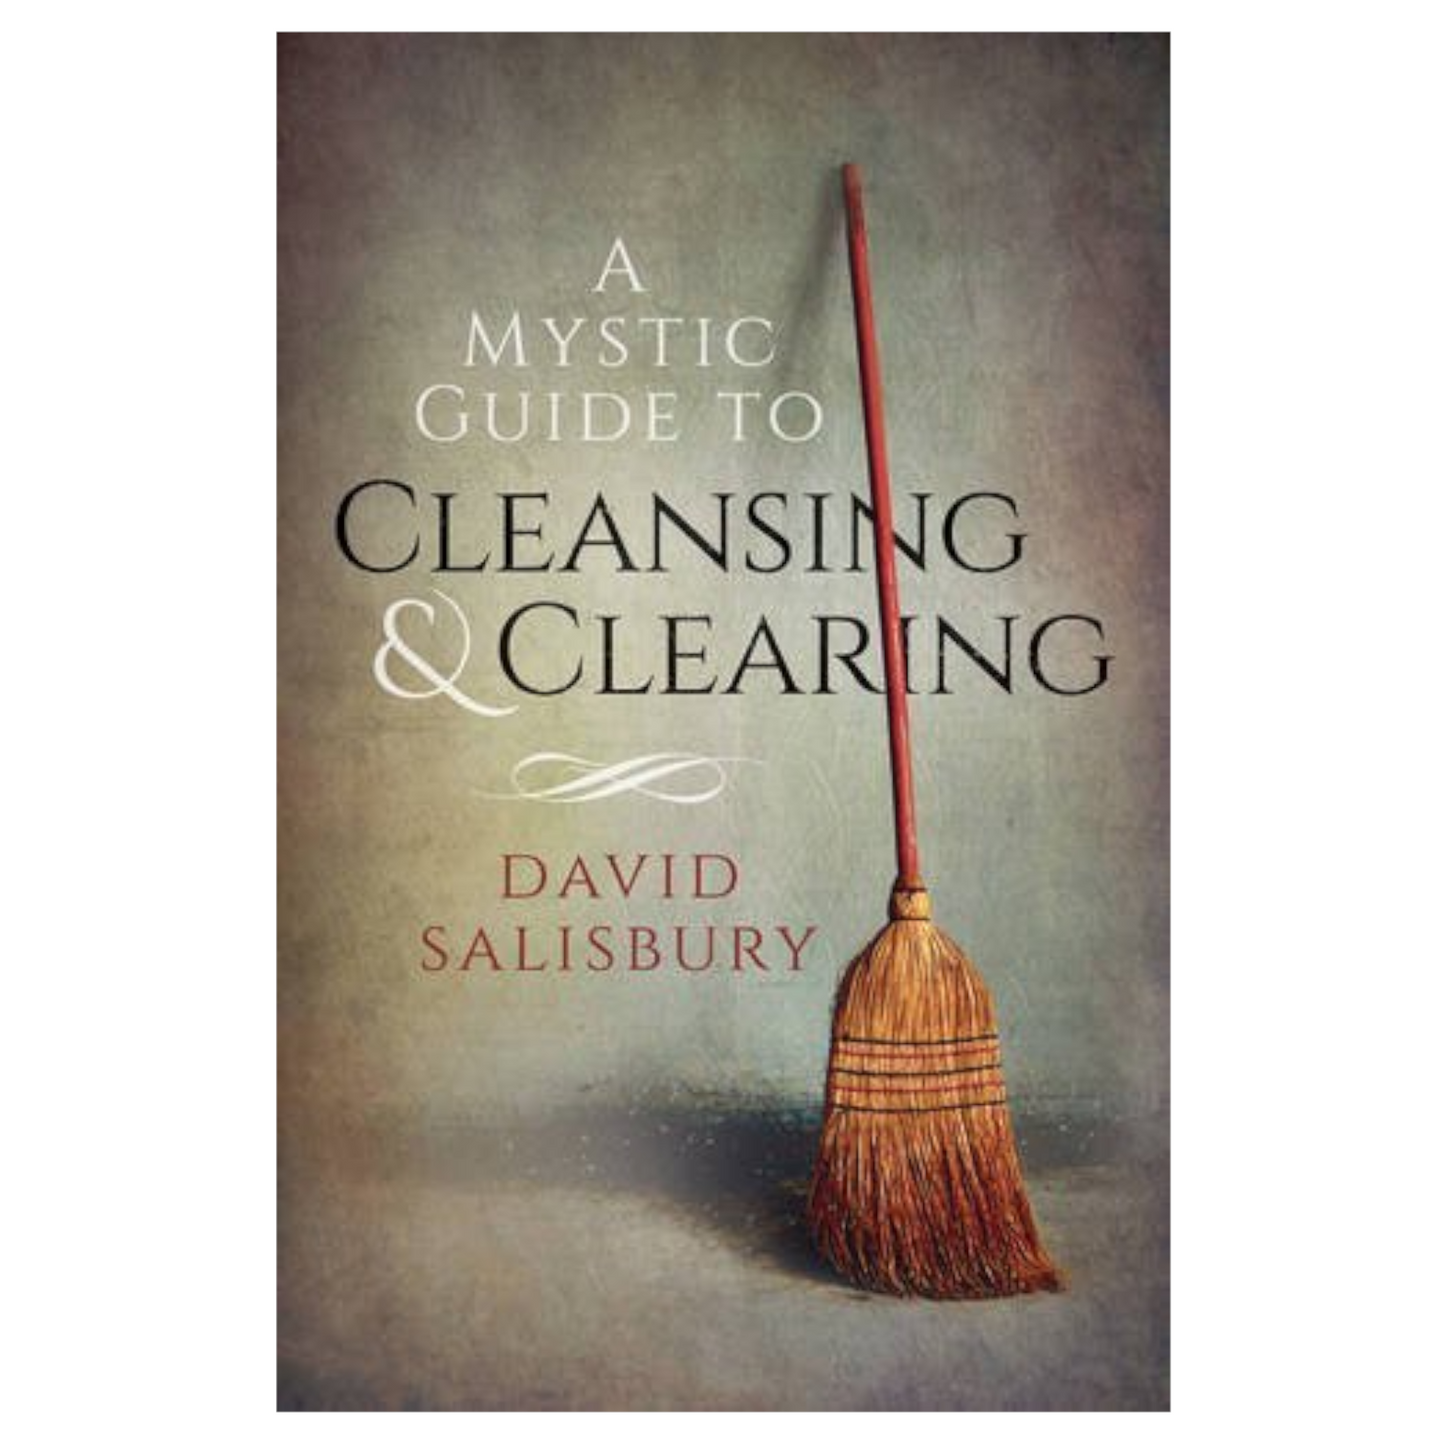 Mystic Guide to Cleansing & Clearing